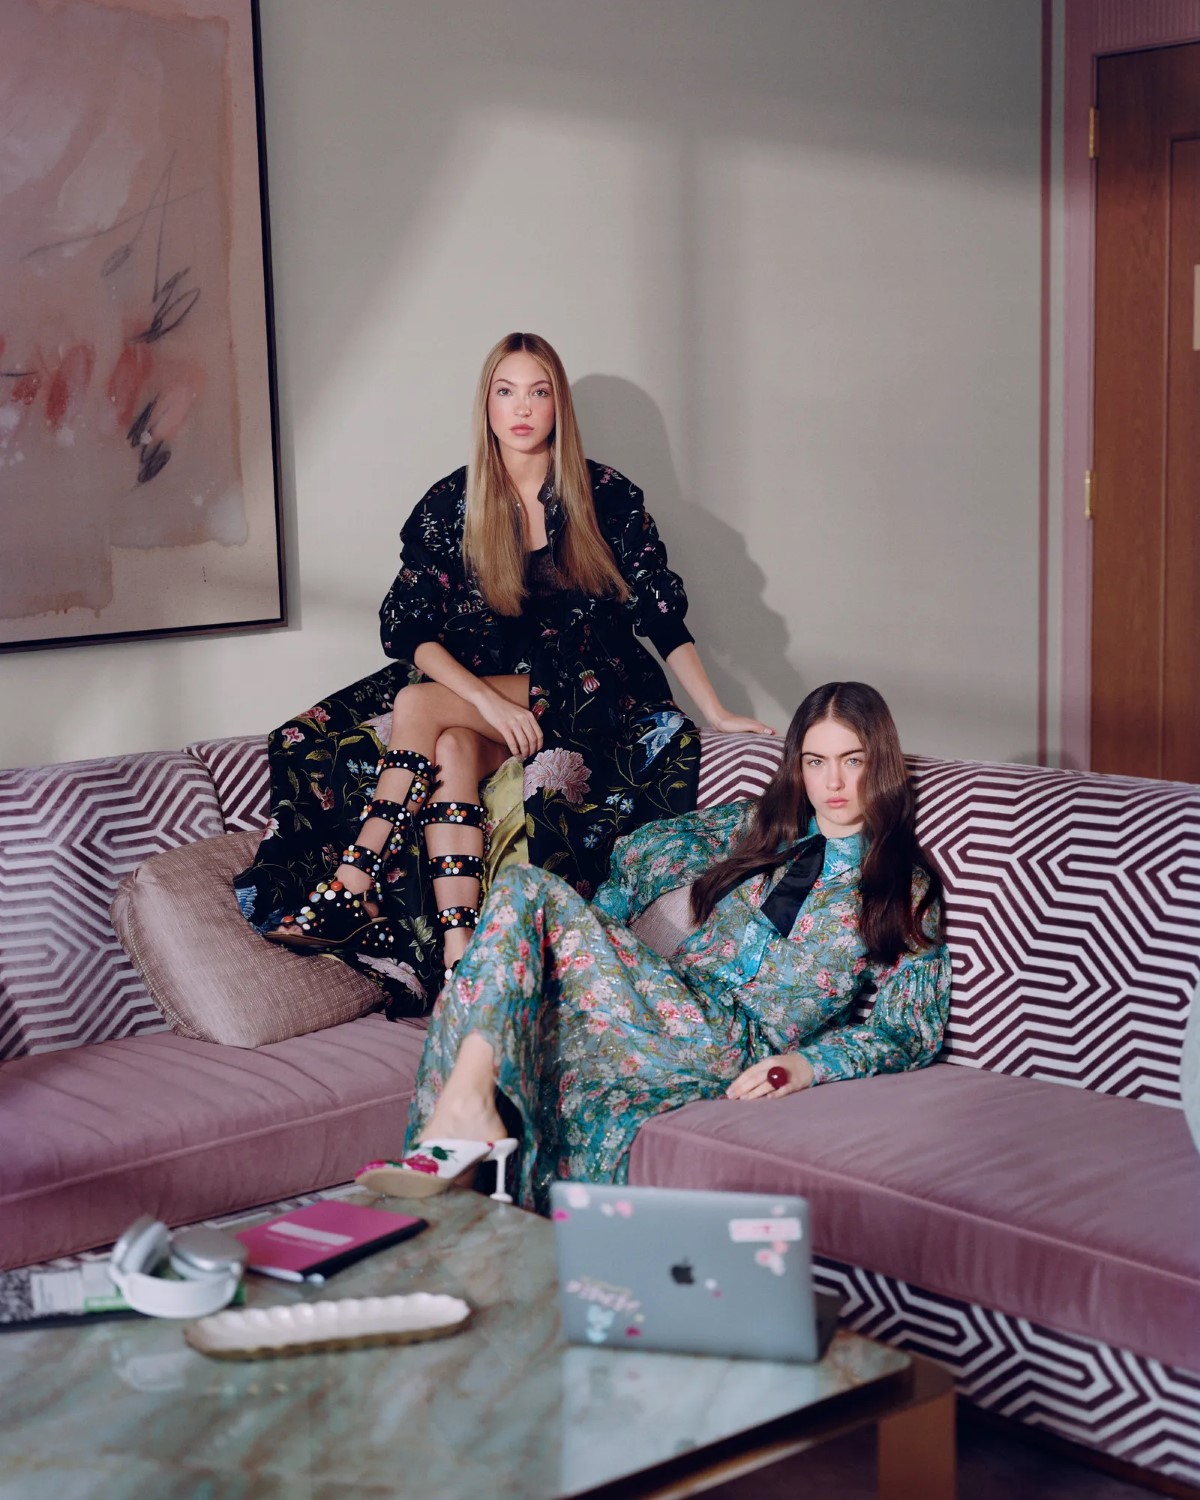 Lila Moss and Stella Jones by Tina Barney for Vogue Global March 2023